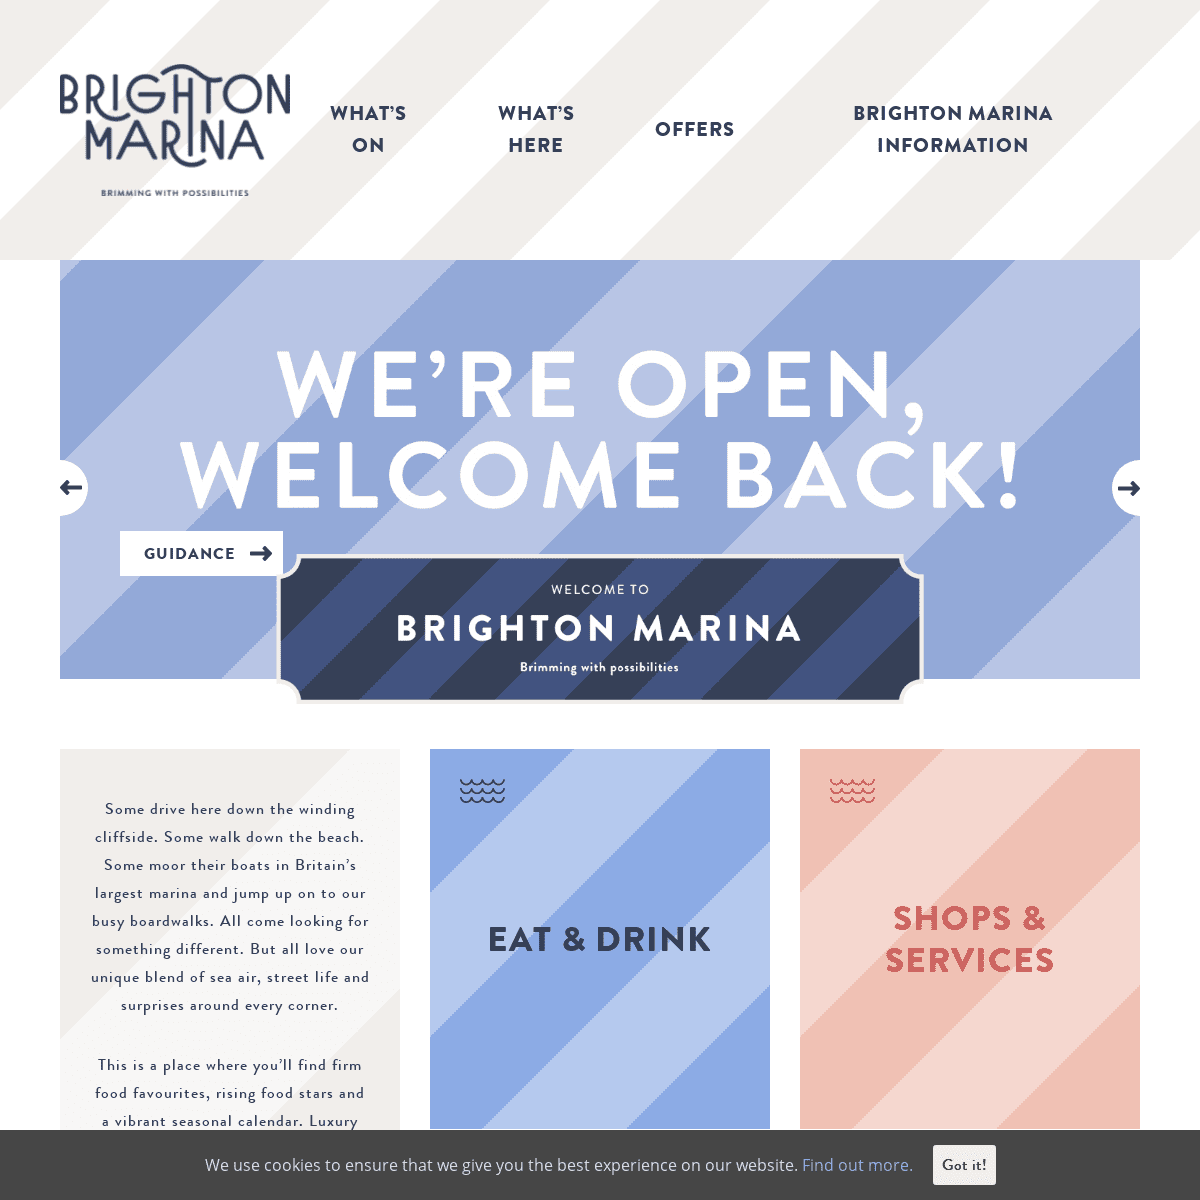 A complete backup of https://brightonmarina.co.uk